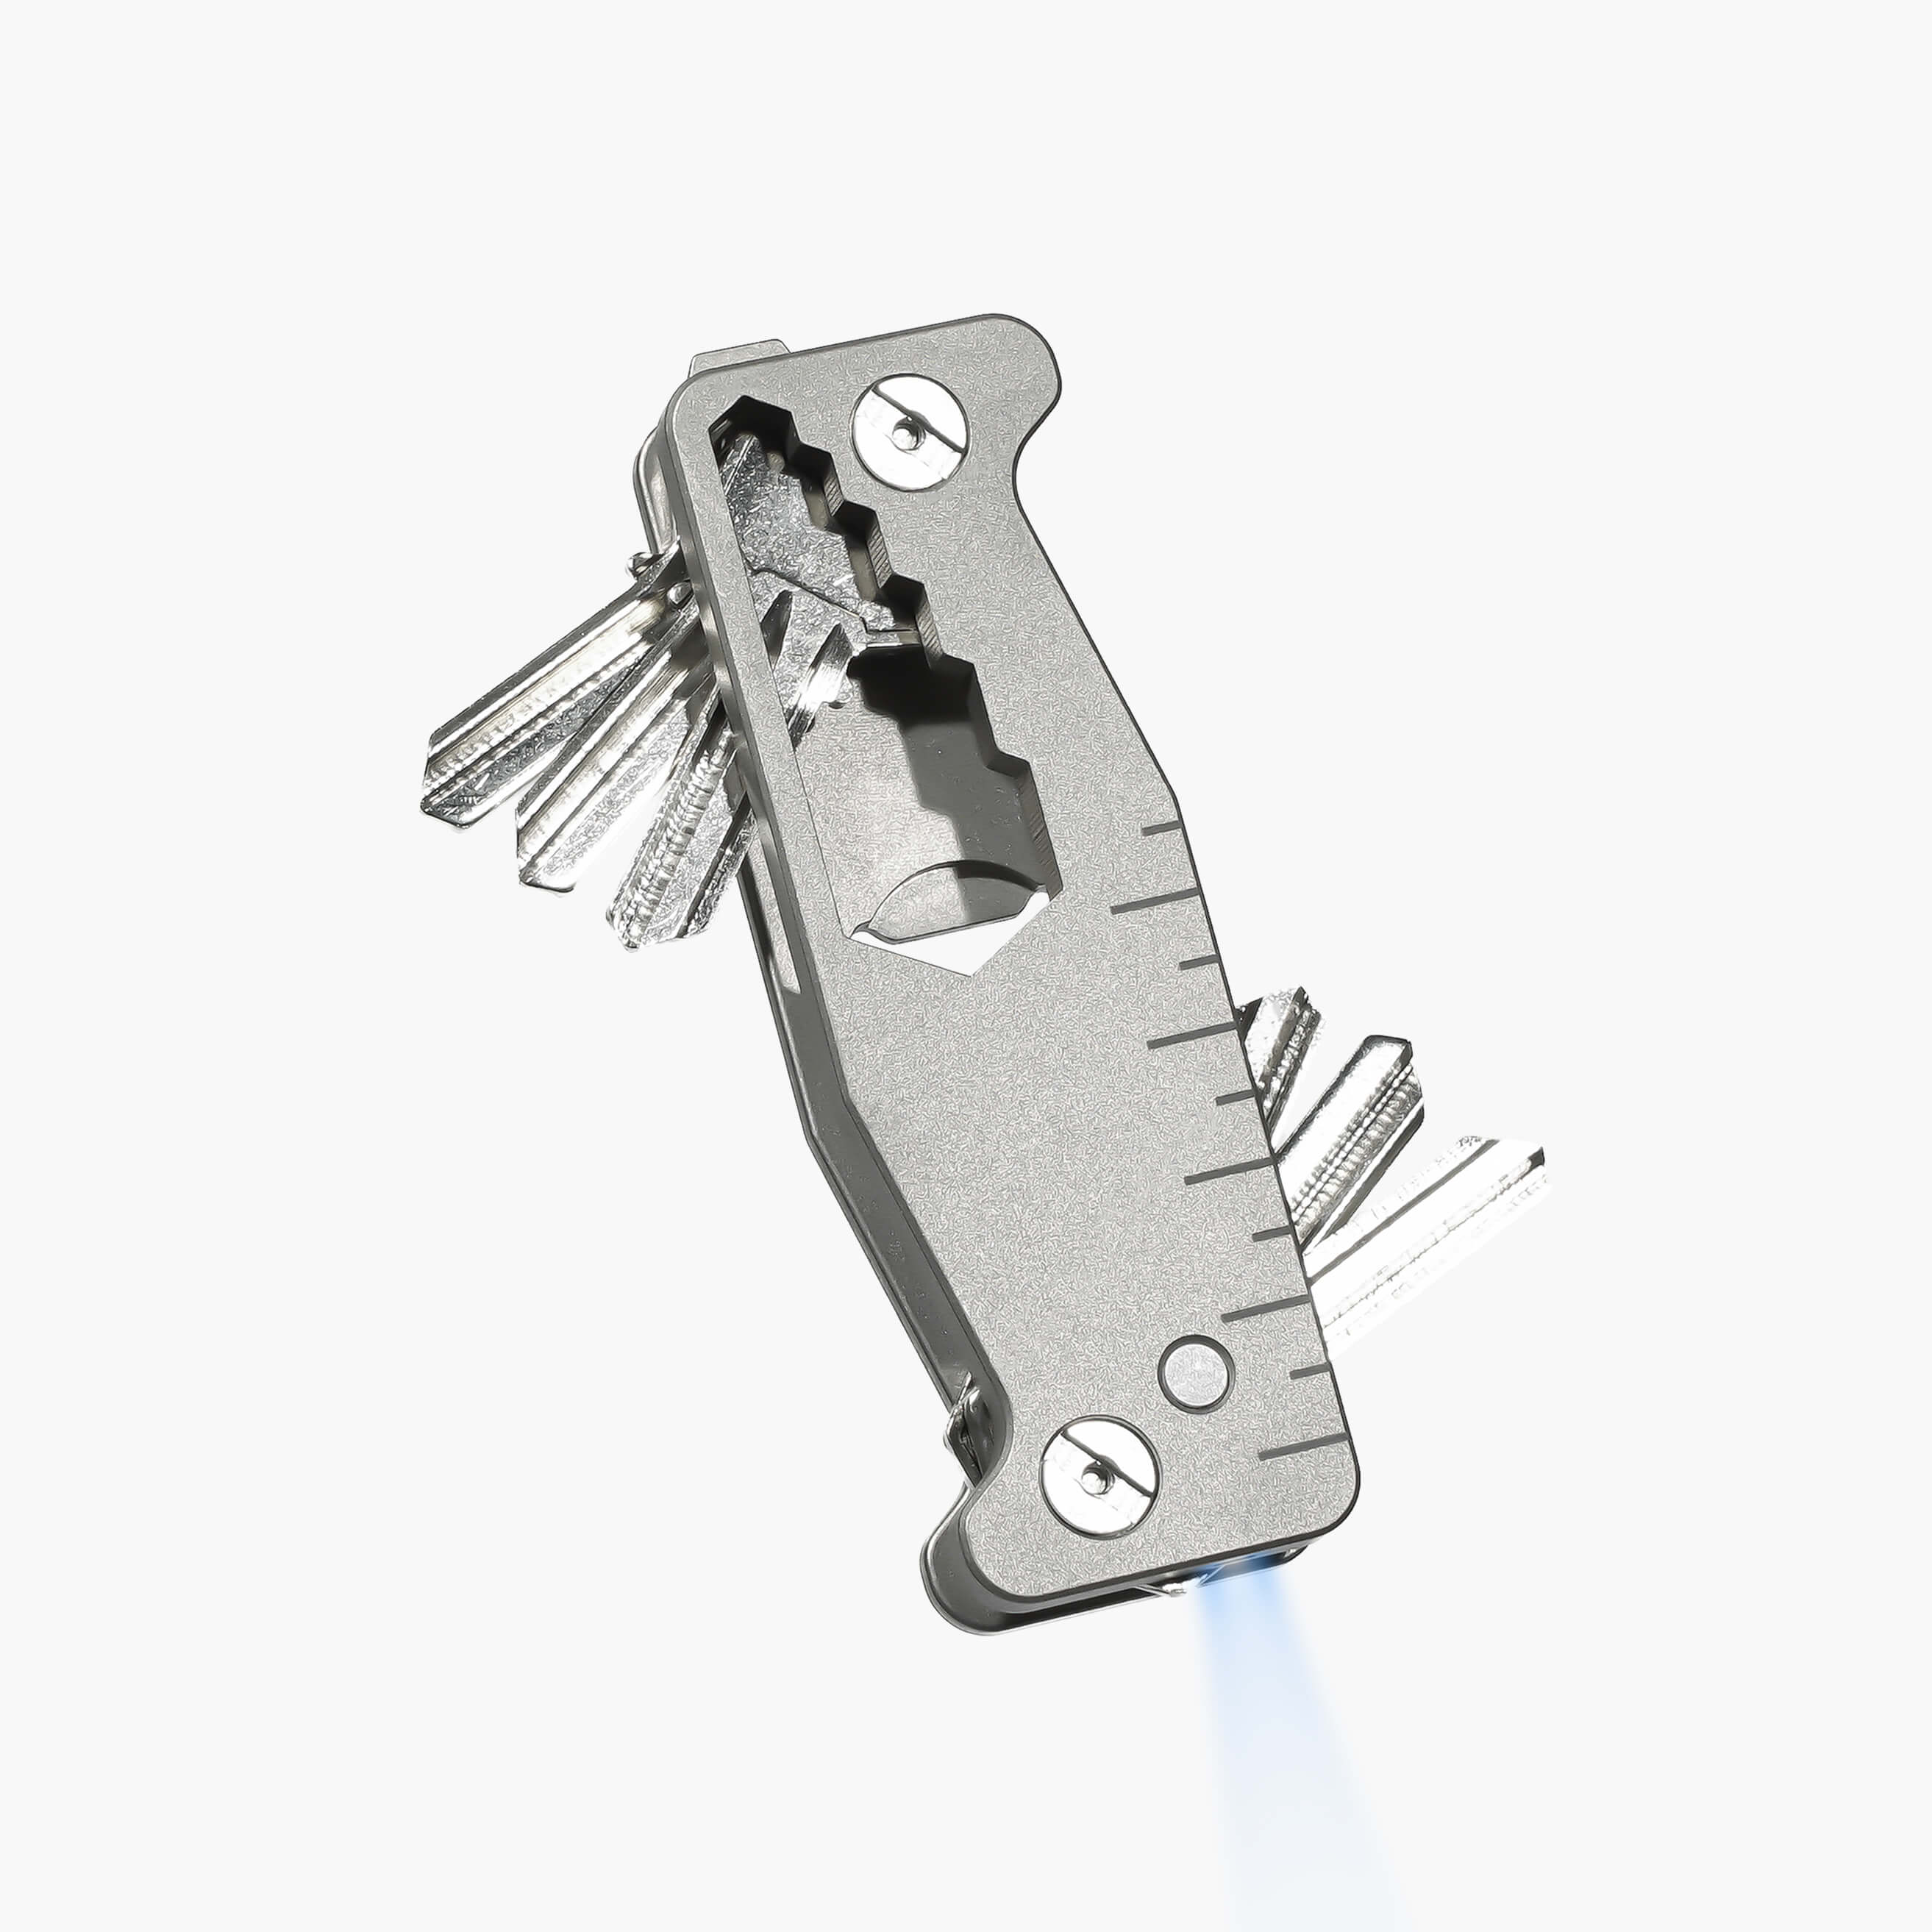 Rhinokey® - The world's first titanium key organizer with multitools and a  light